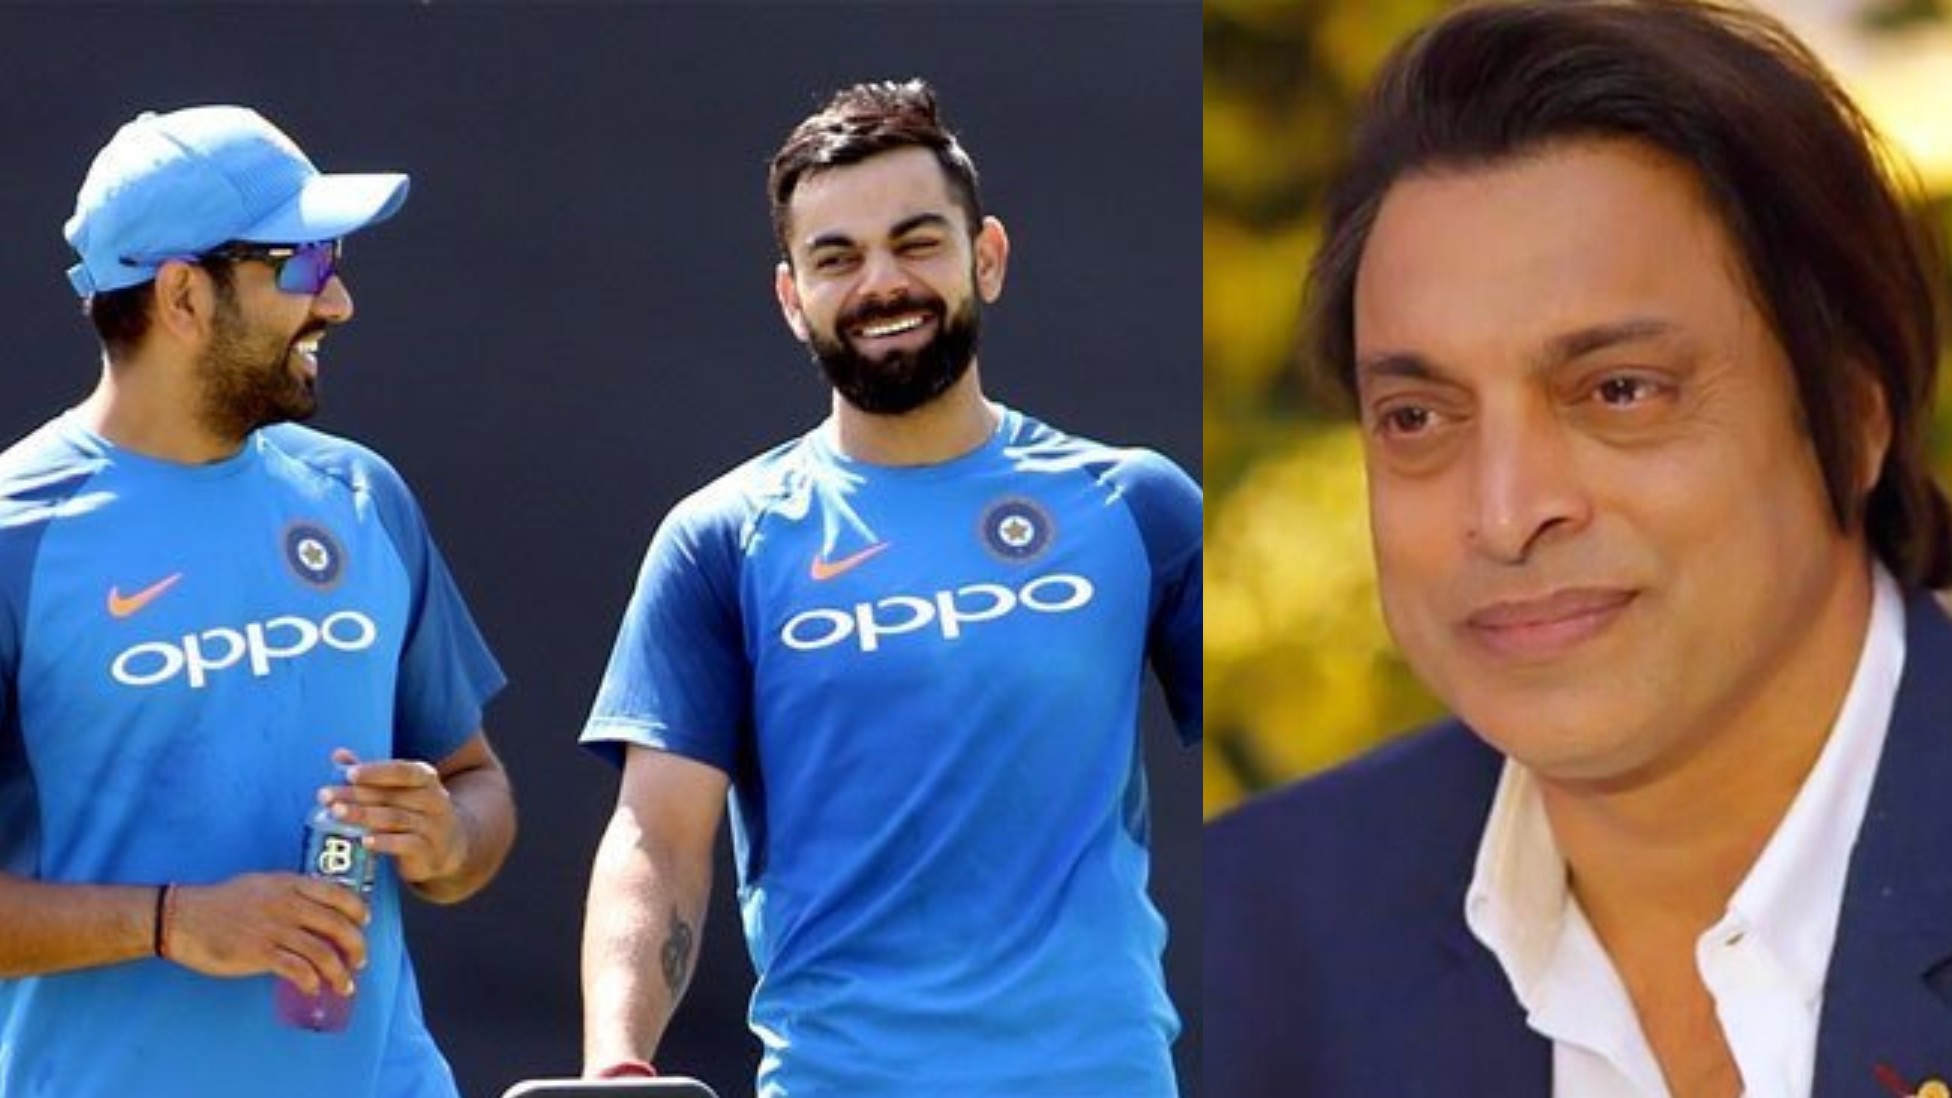 AUS v IND 2020-21: Rohit Sharma doing well in Australia will encourage calls for split captaincy, opines Shoaib Akhtar